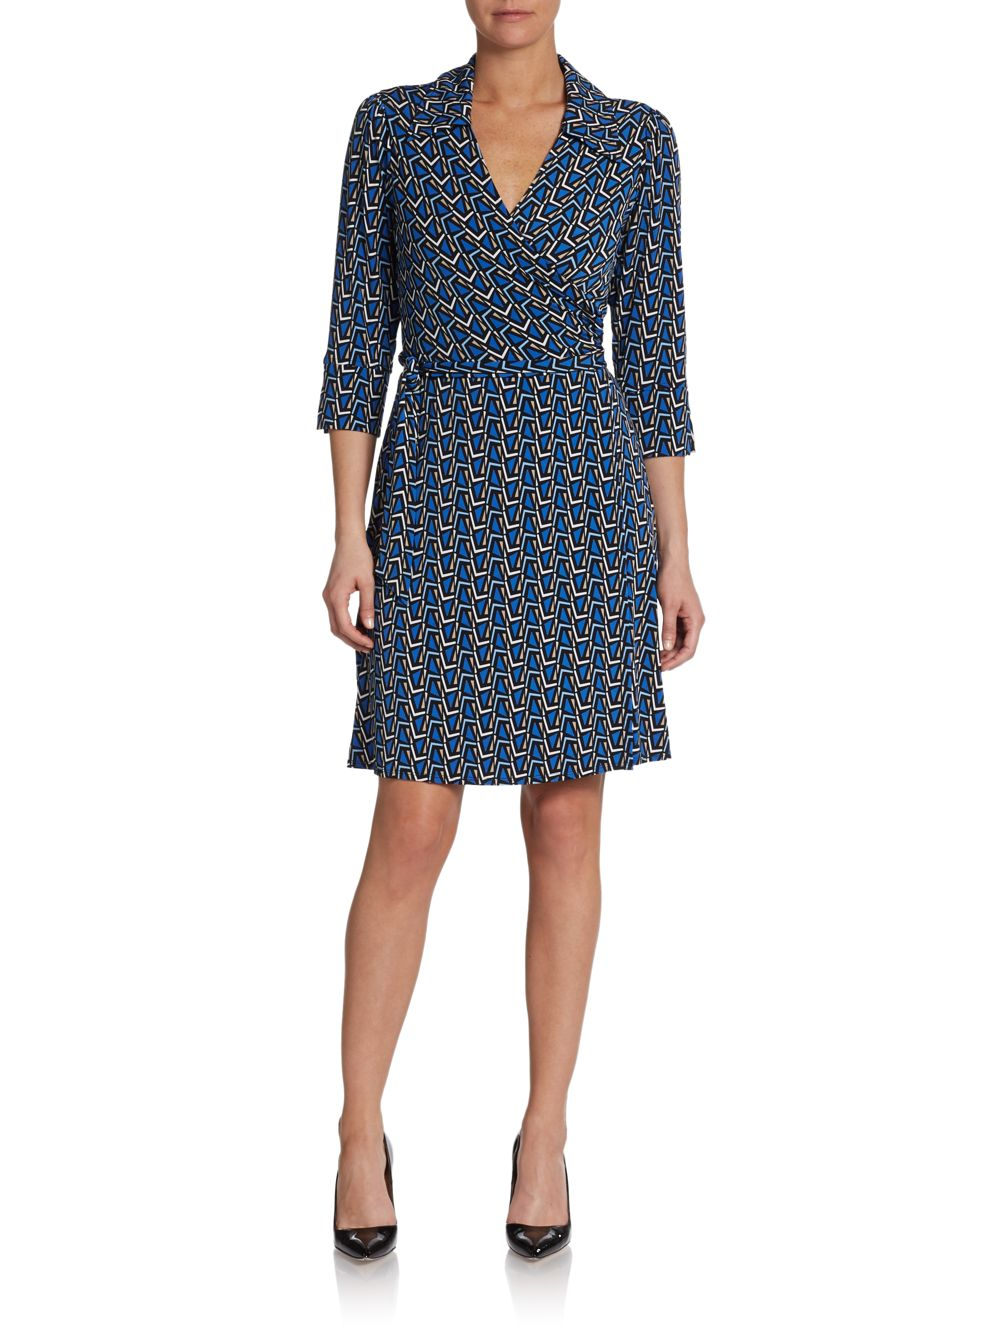 Laundry by Shelli Segal Printed Wrap Dress in Blue | Lyst